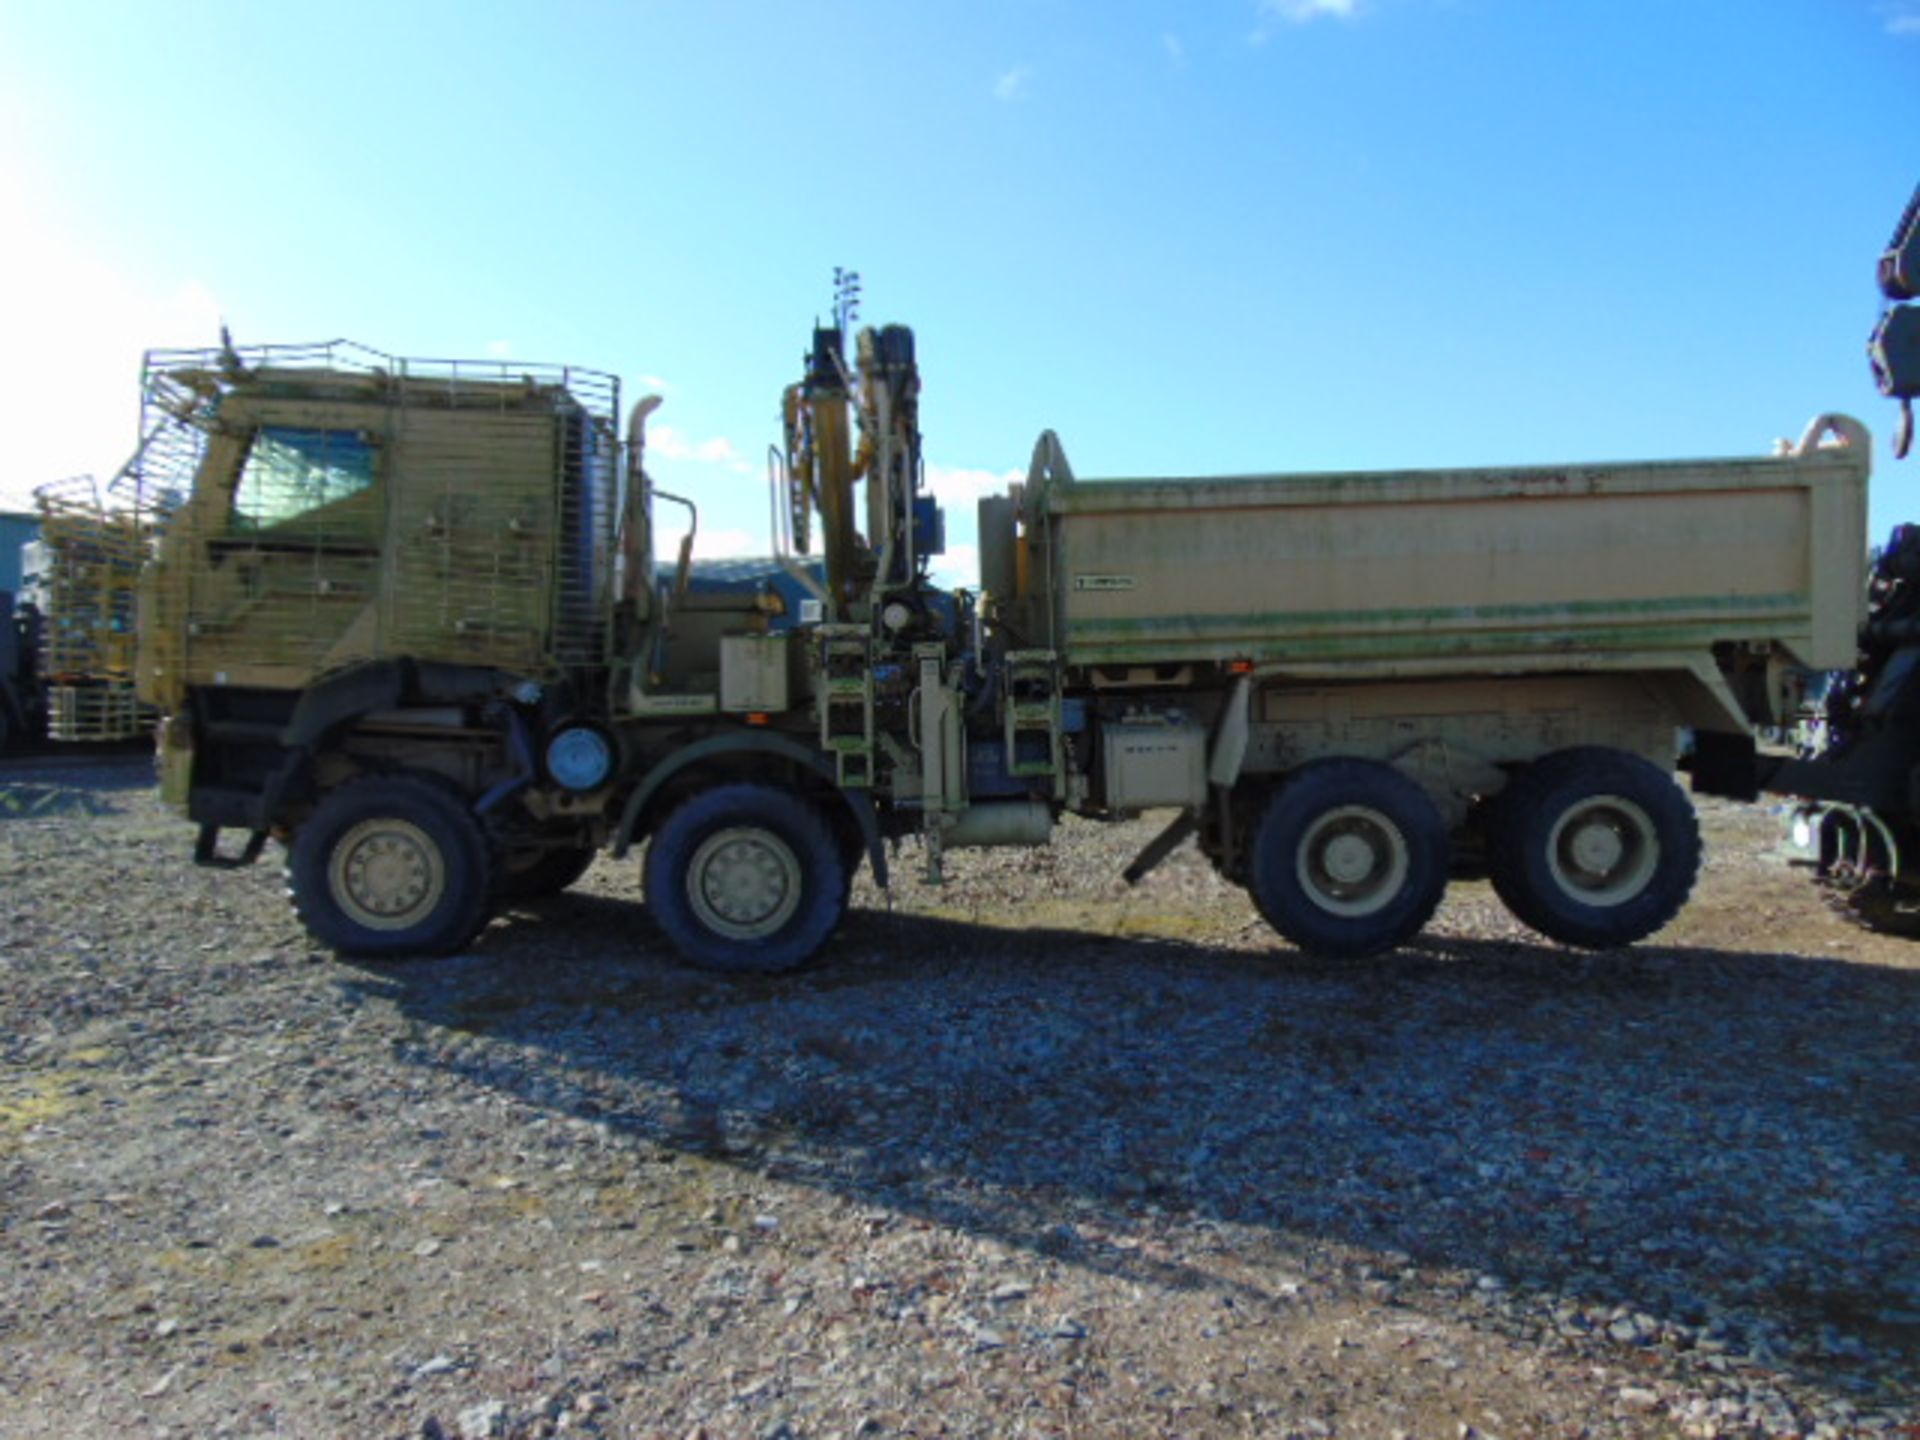 Damage Repairable LHD Iveco Trakker 8x8 Self Loading Dump Truck (Protected) - Image 4 of 15